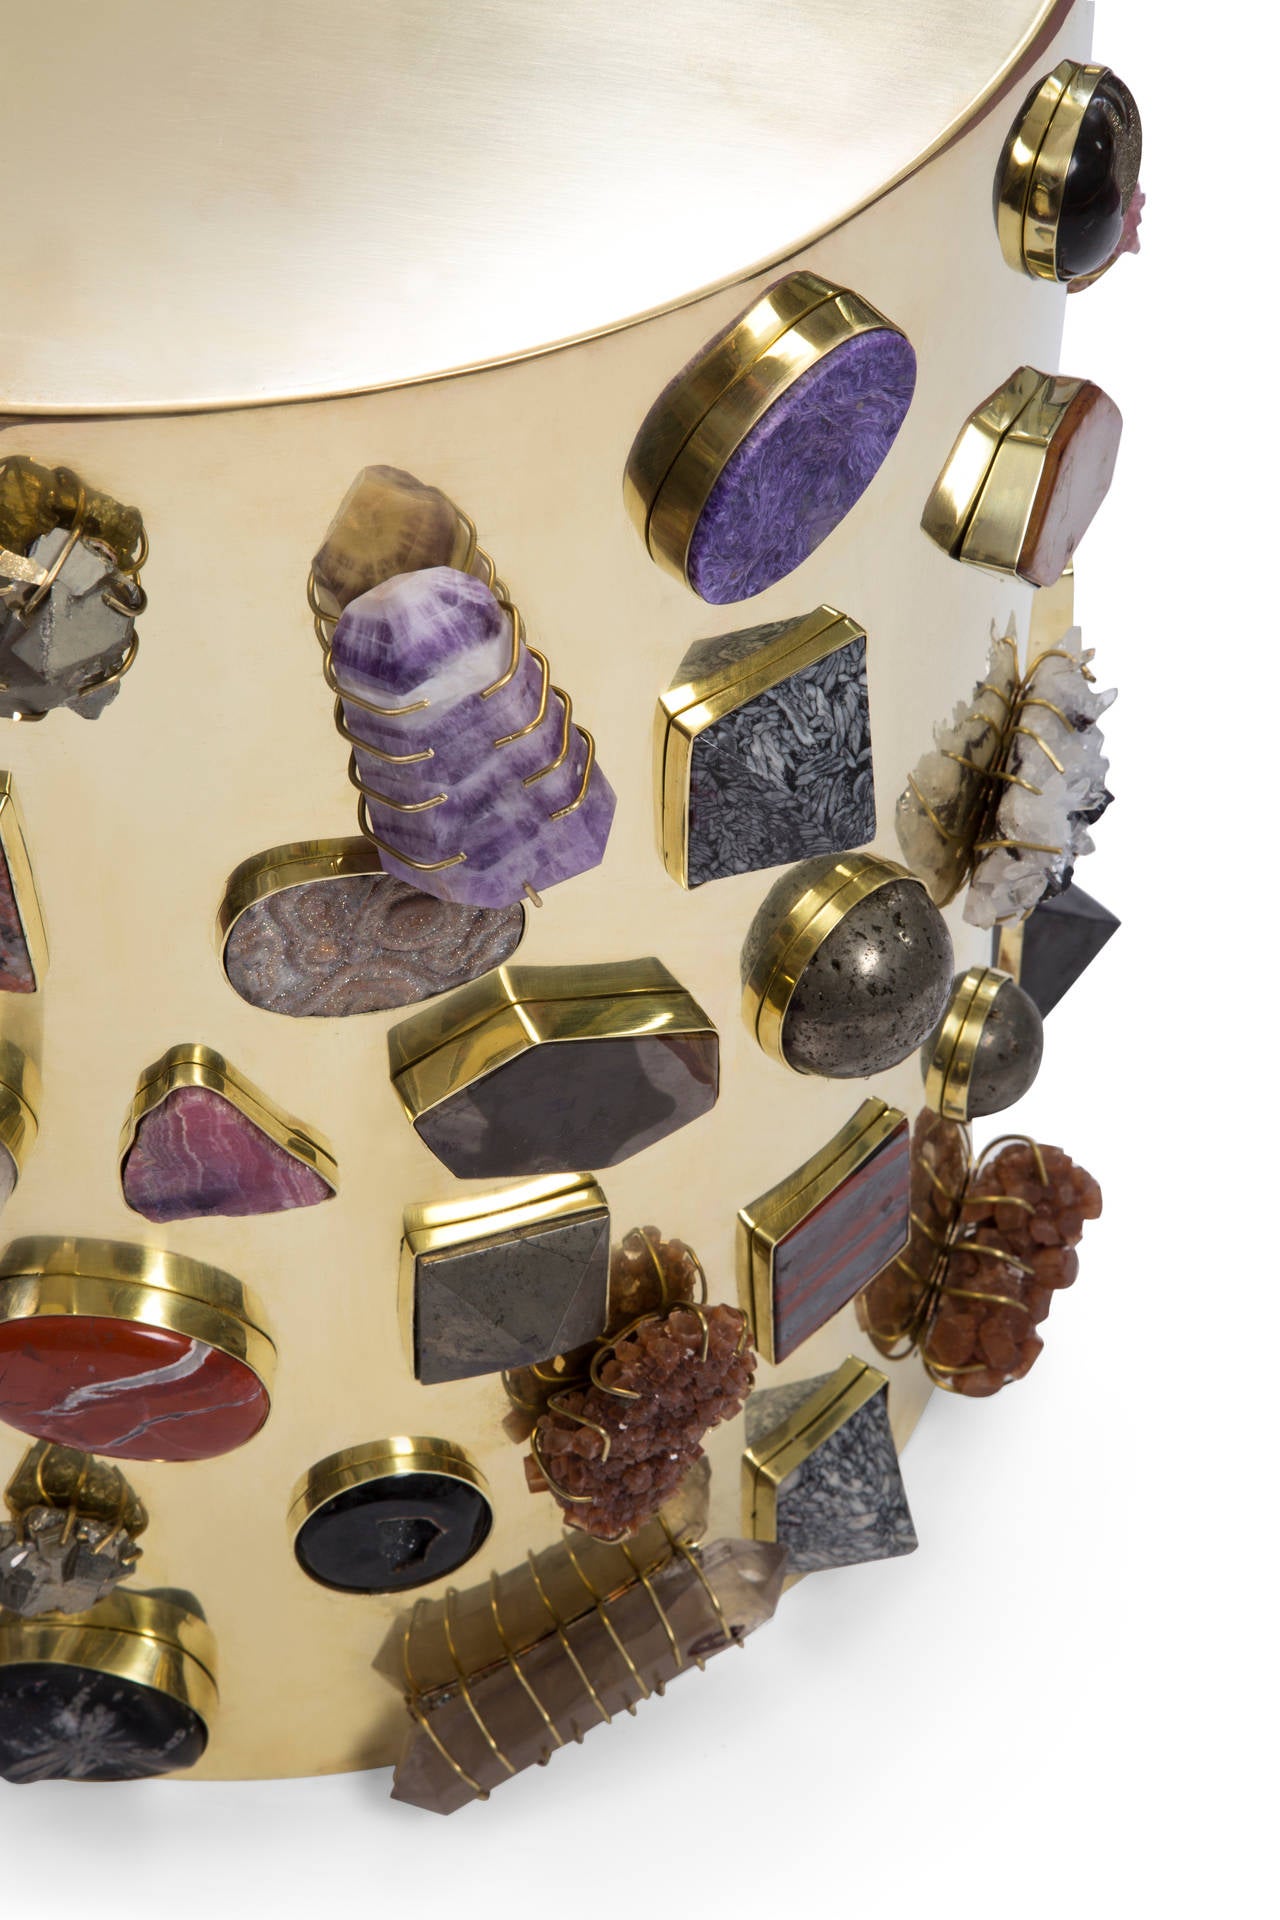 The Bejeweled Stool is available in natural bronze, which will develop a rich antique luster over time. Each stool features a completely unique collection of semi-precious stones; no two are completely alike.  Stones include a mixture of lapis,